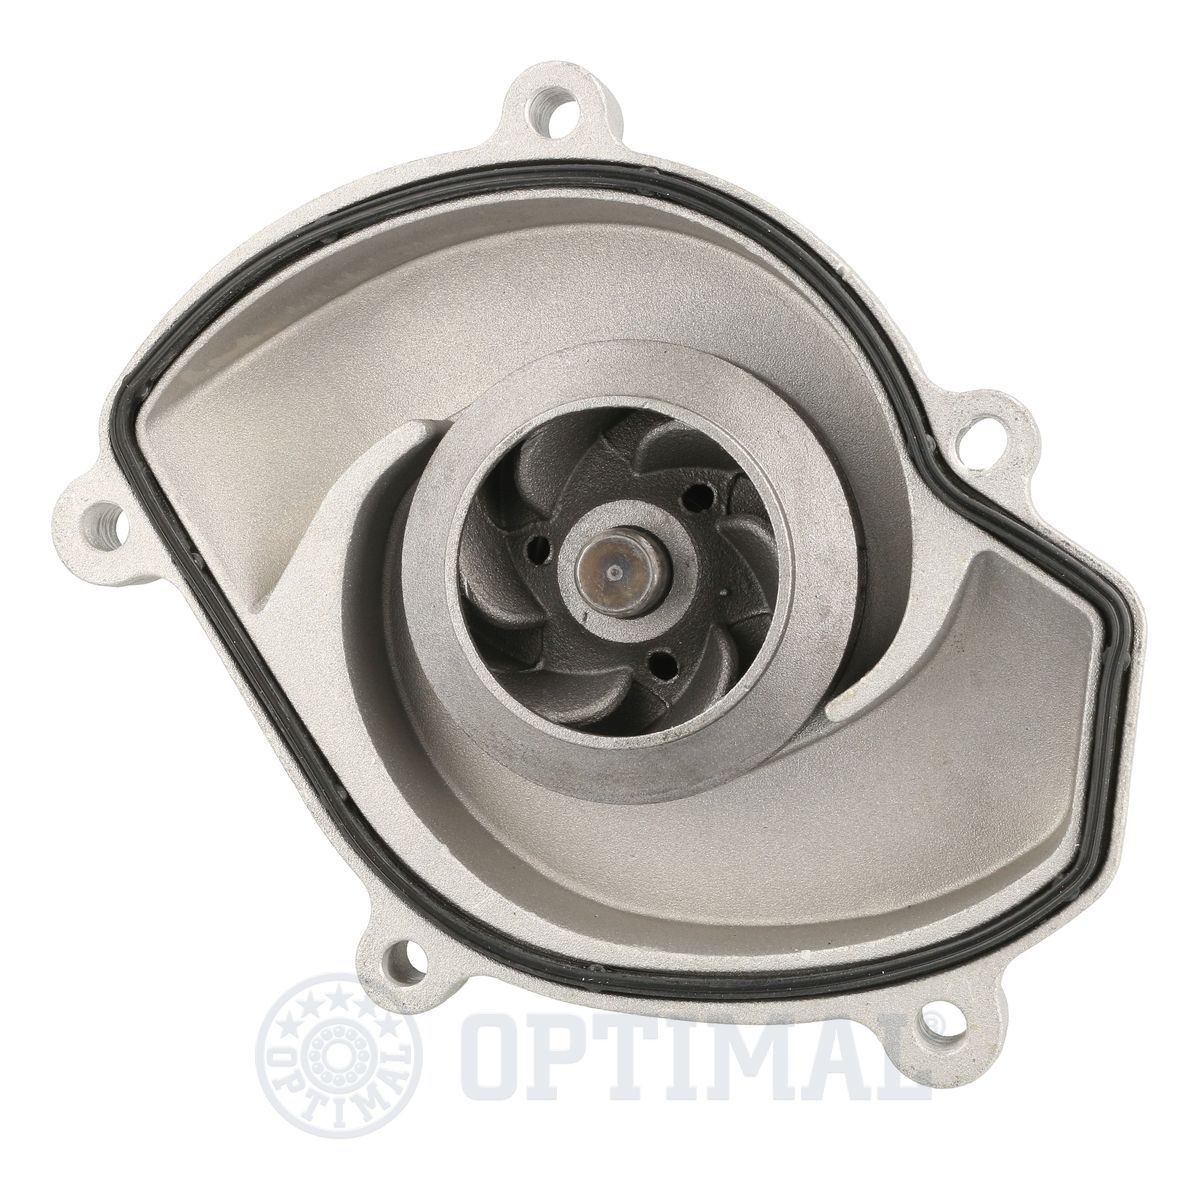 OPTIMAL Water pump for engine AQ-2424 for PORSCHE CAYENNE, PANAMERA, MACAN